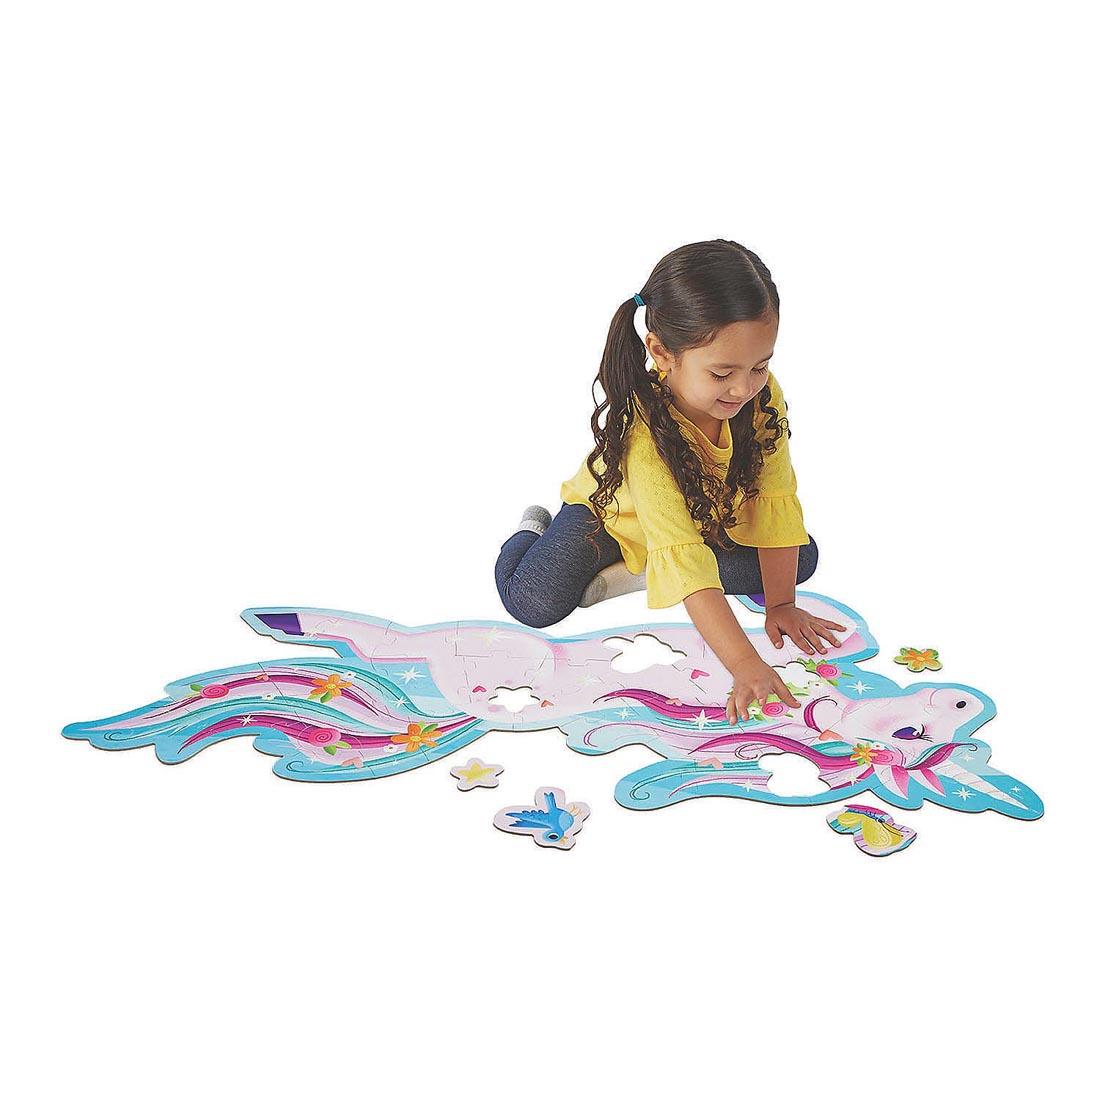 Child completing the Unicorn Floor Puzzle by Peaceable Kingdom